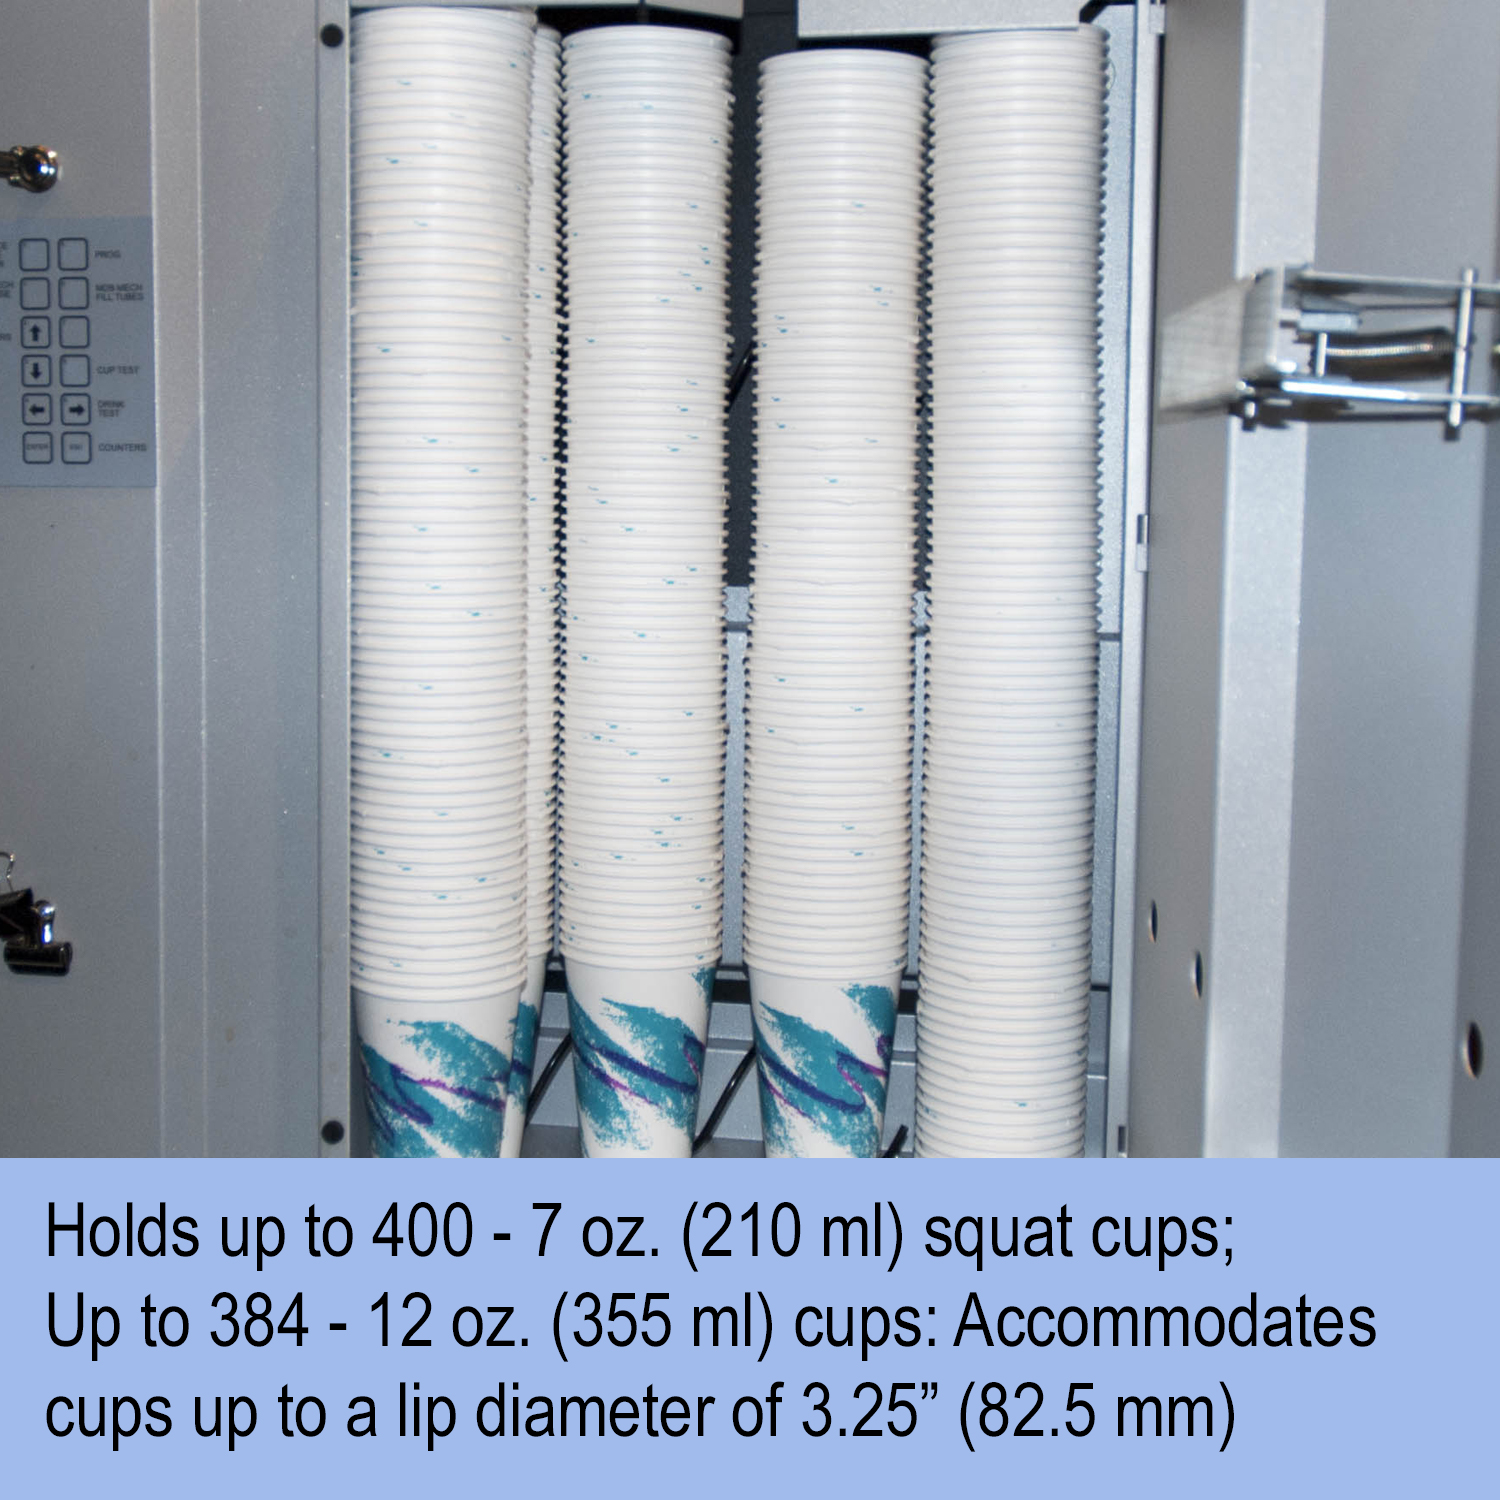 Accommodate a variety of cup sizes when using the Coffee Hot Beverage Vending Machine.